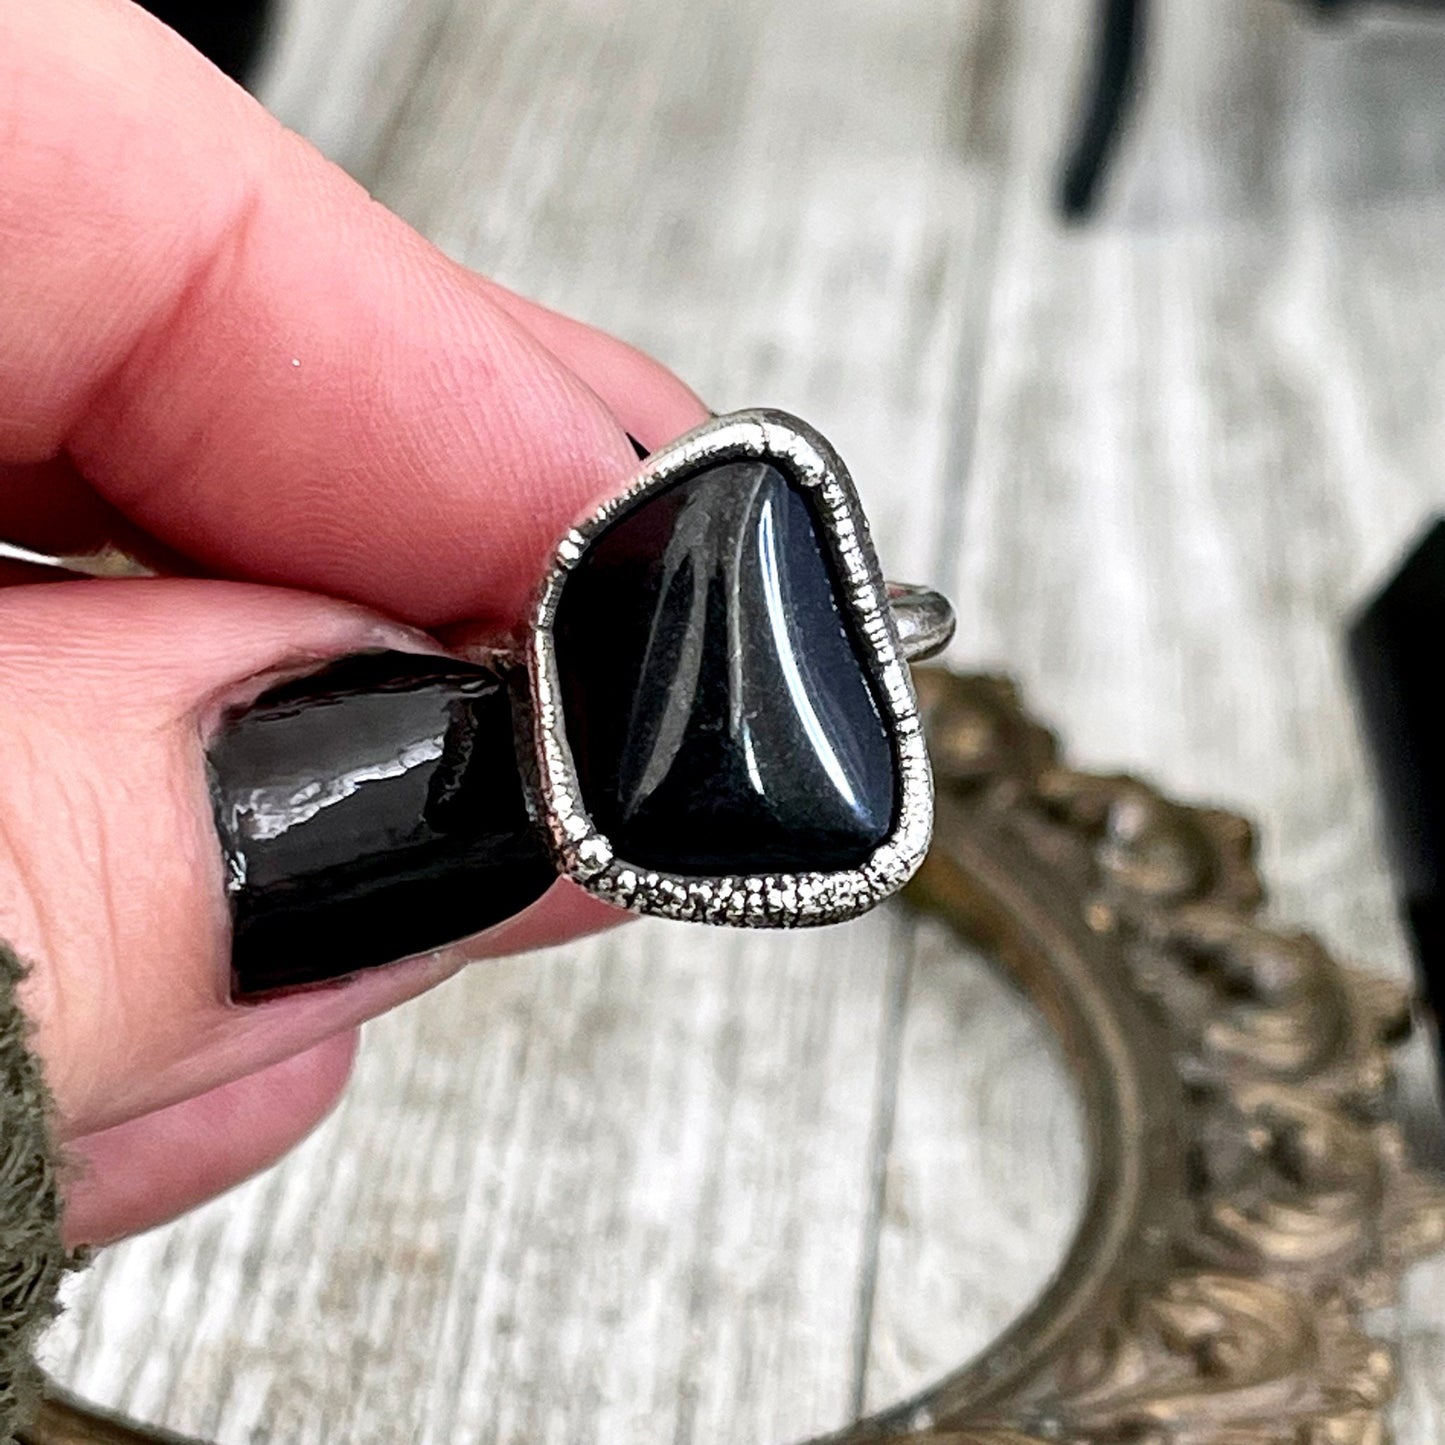 Natural Black Onyx Small Stone Ring in Fine Silver Size 5 6 7 8 9 10 / Foxlark Collection